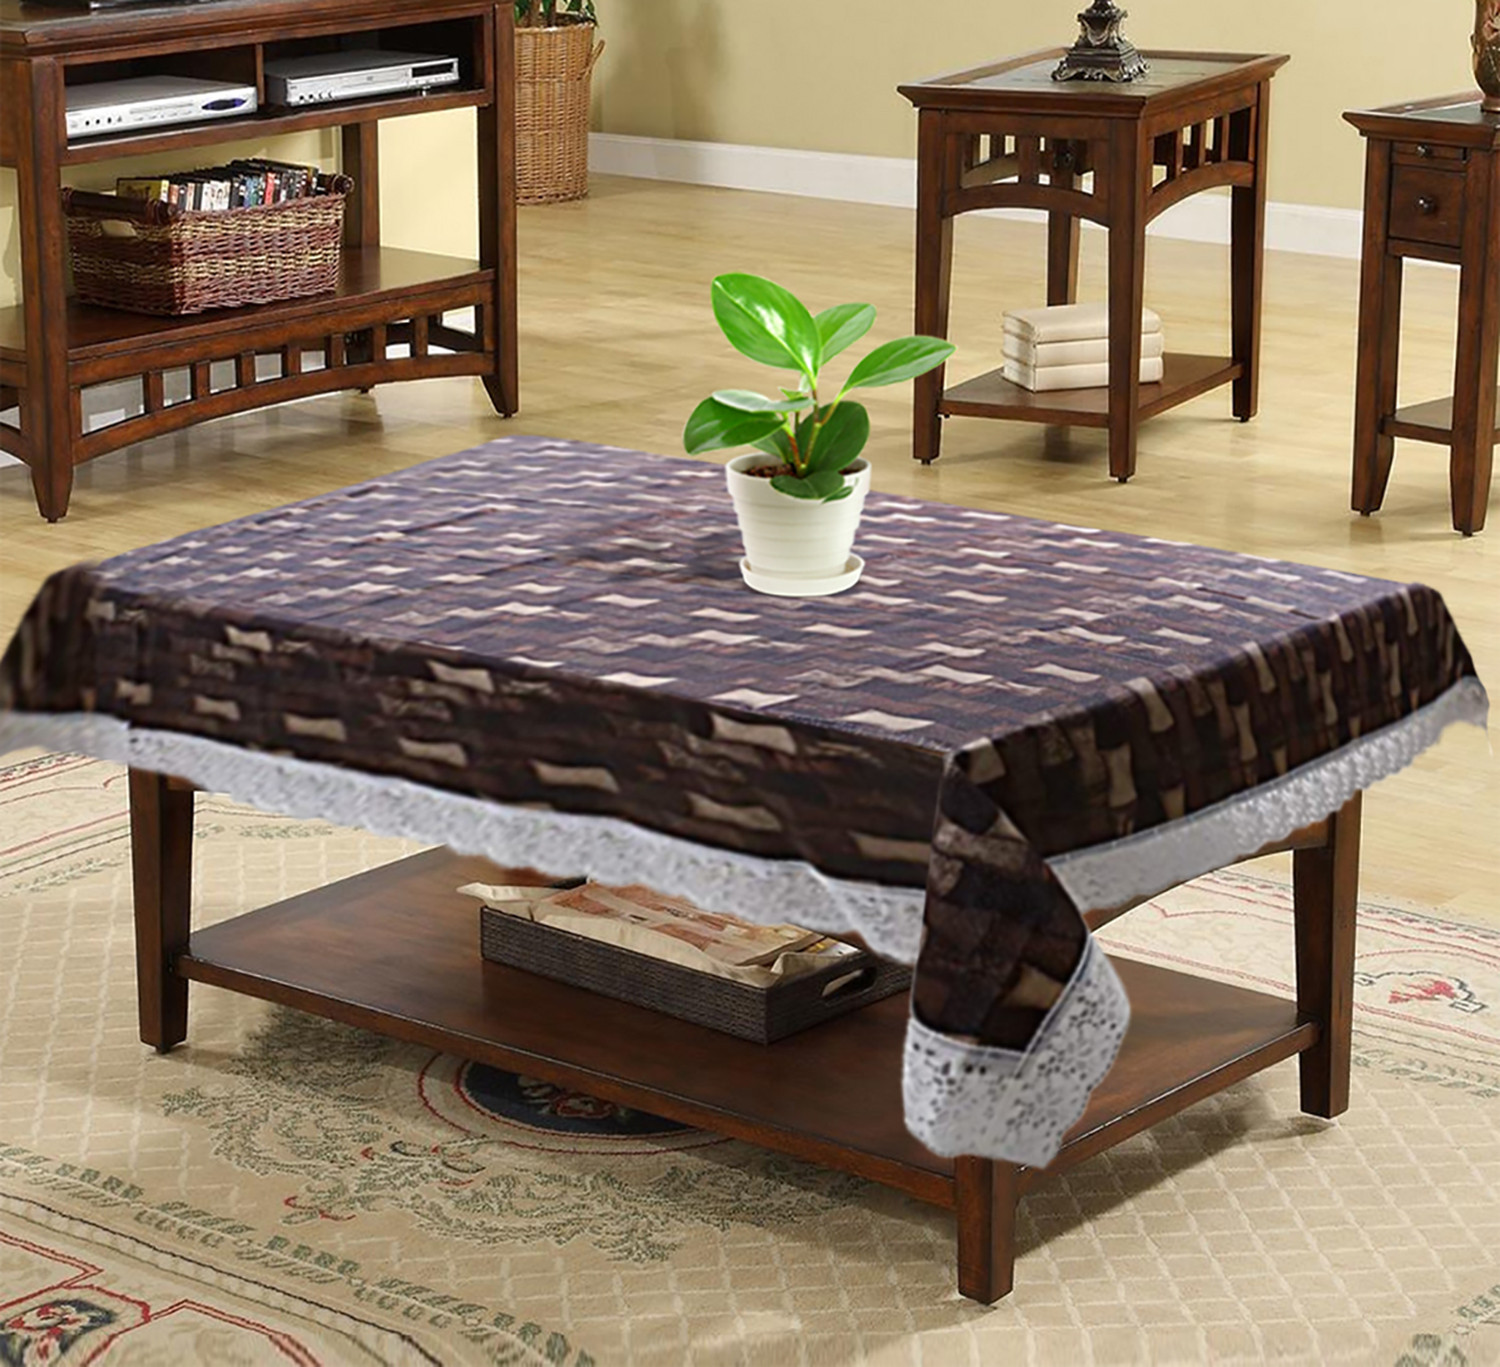 Kuber Industries Bamboo Design PVC 4 Seater Center Table Cover 40